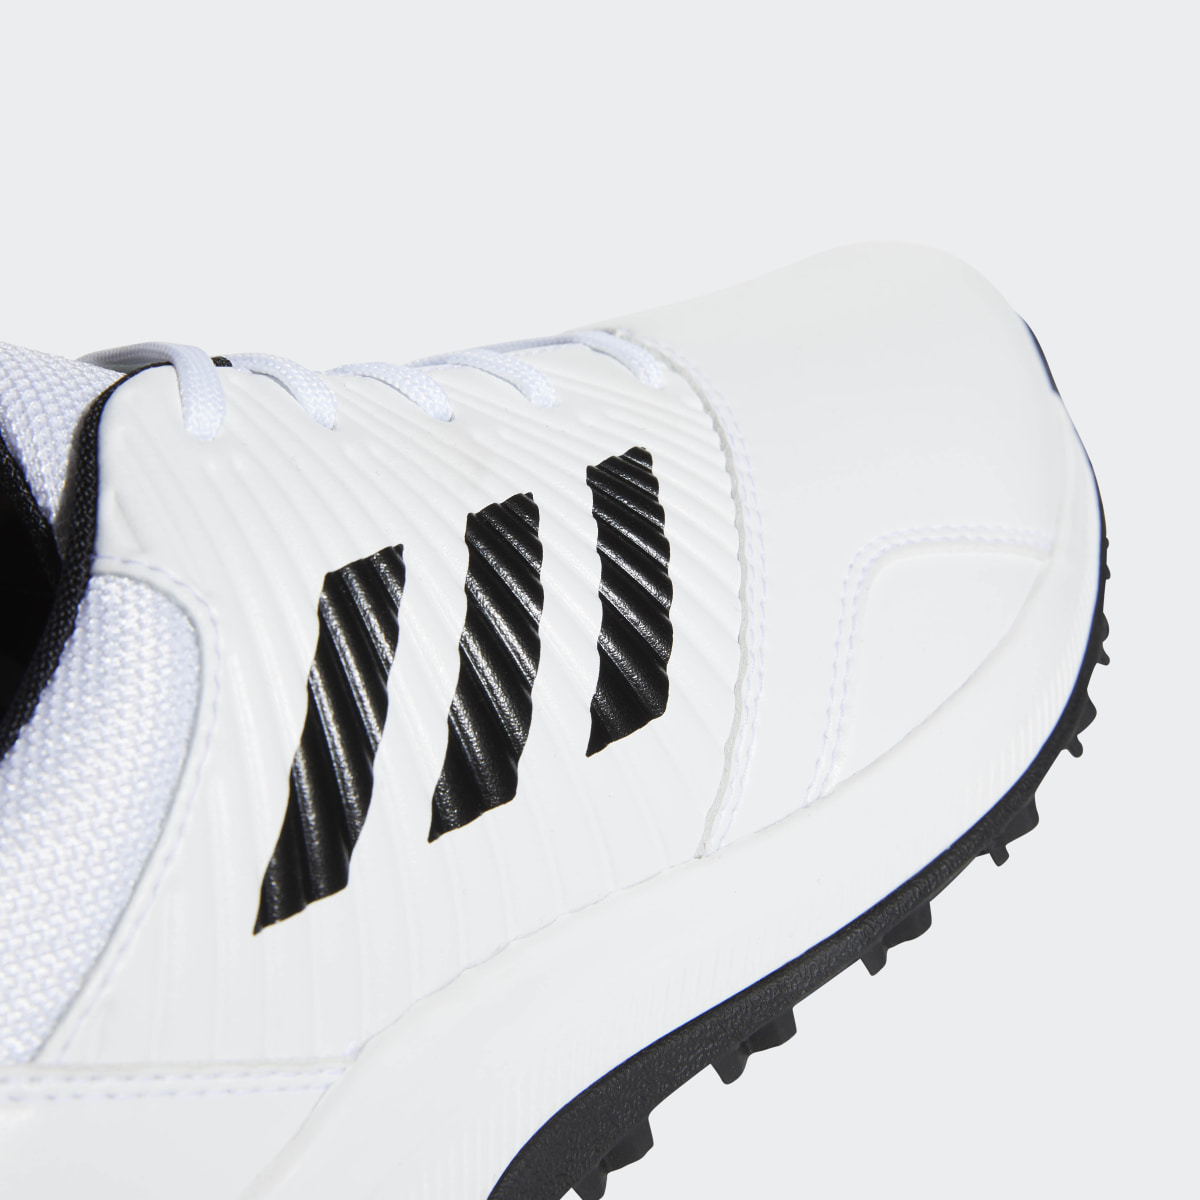 Adidas Chaussure CP Traxion Spikeless. 10